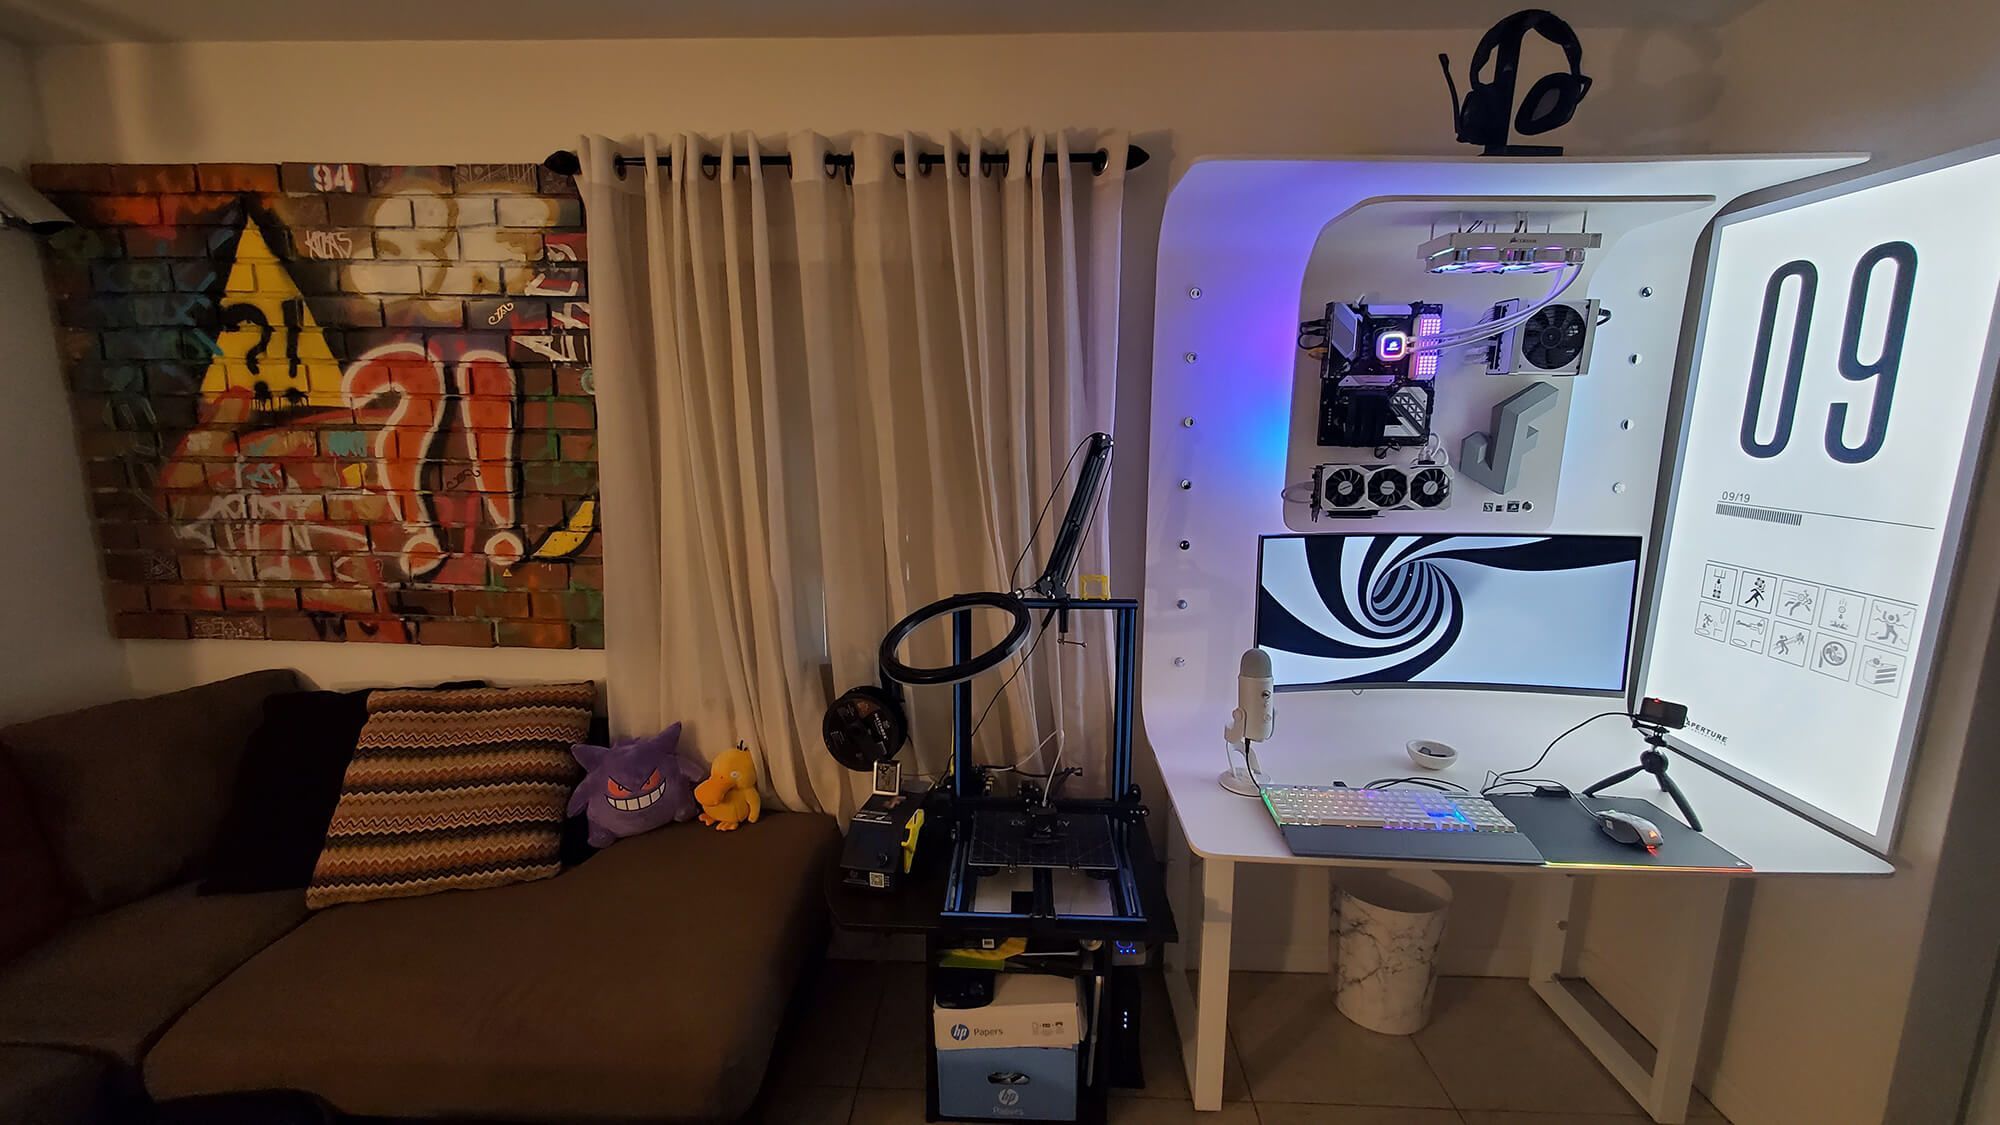 A DIY minimalist battlestation in Florida, with a large monitor, PVC piping desk, 3D printer setup, ambient lighting, and a graffiti art backdrop.